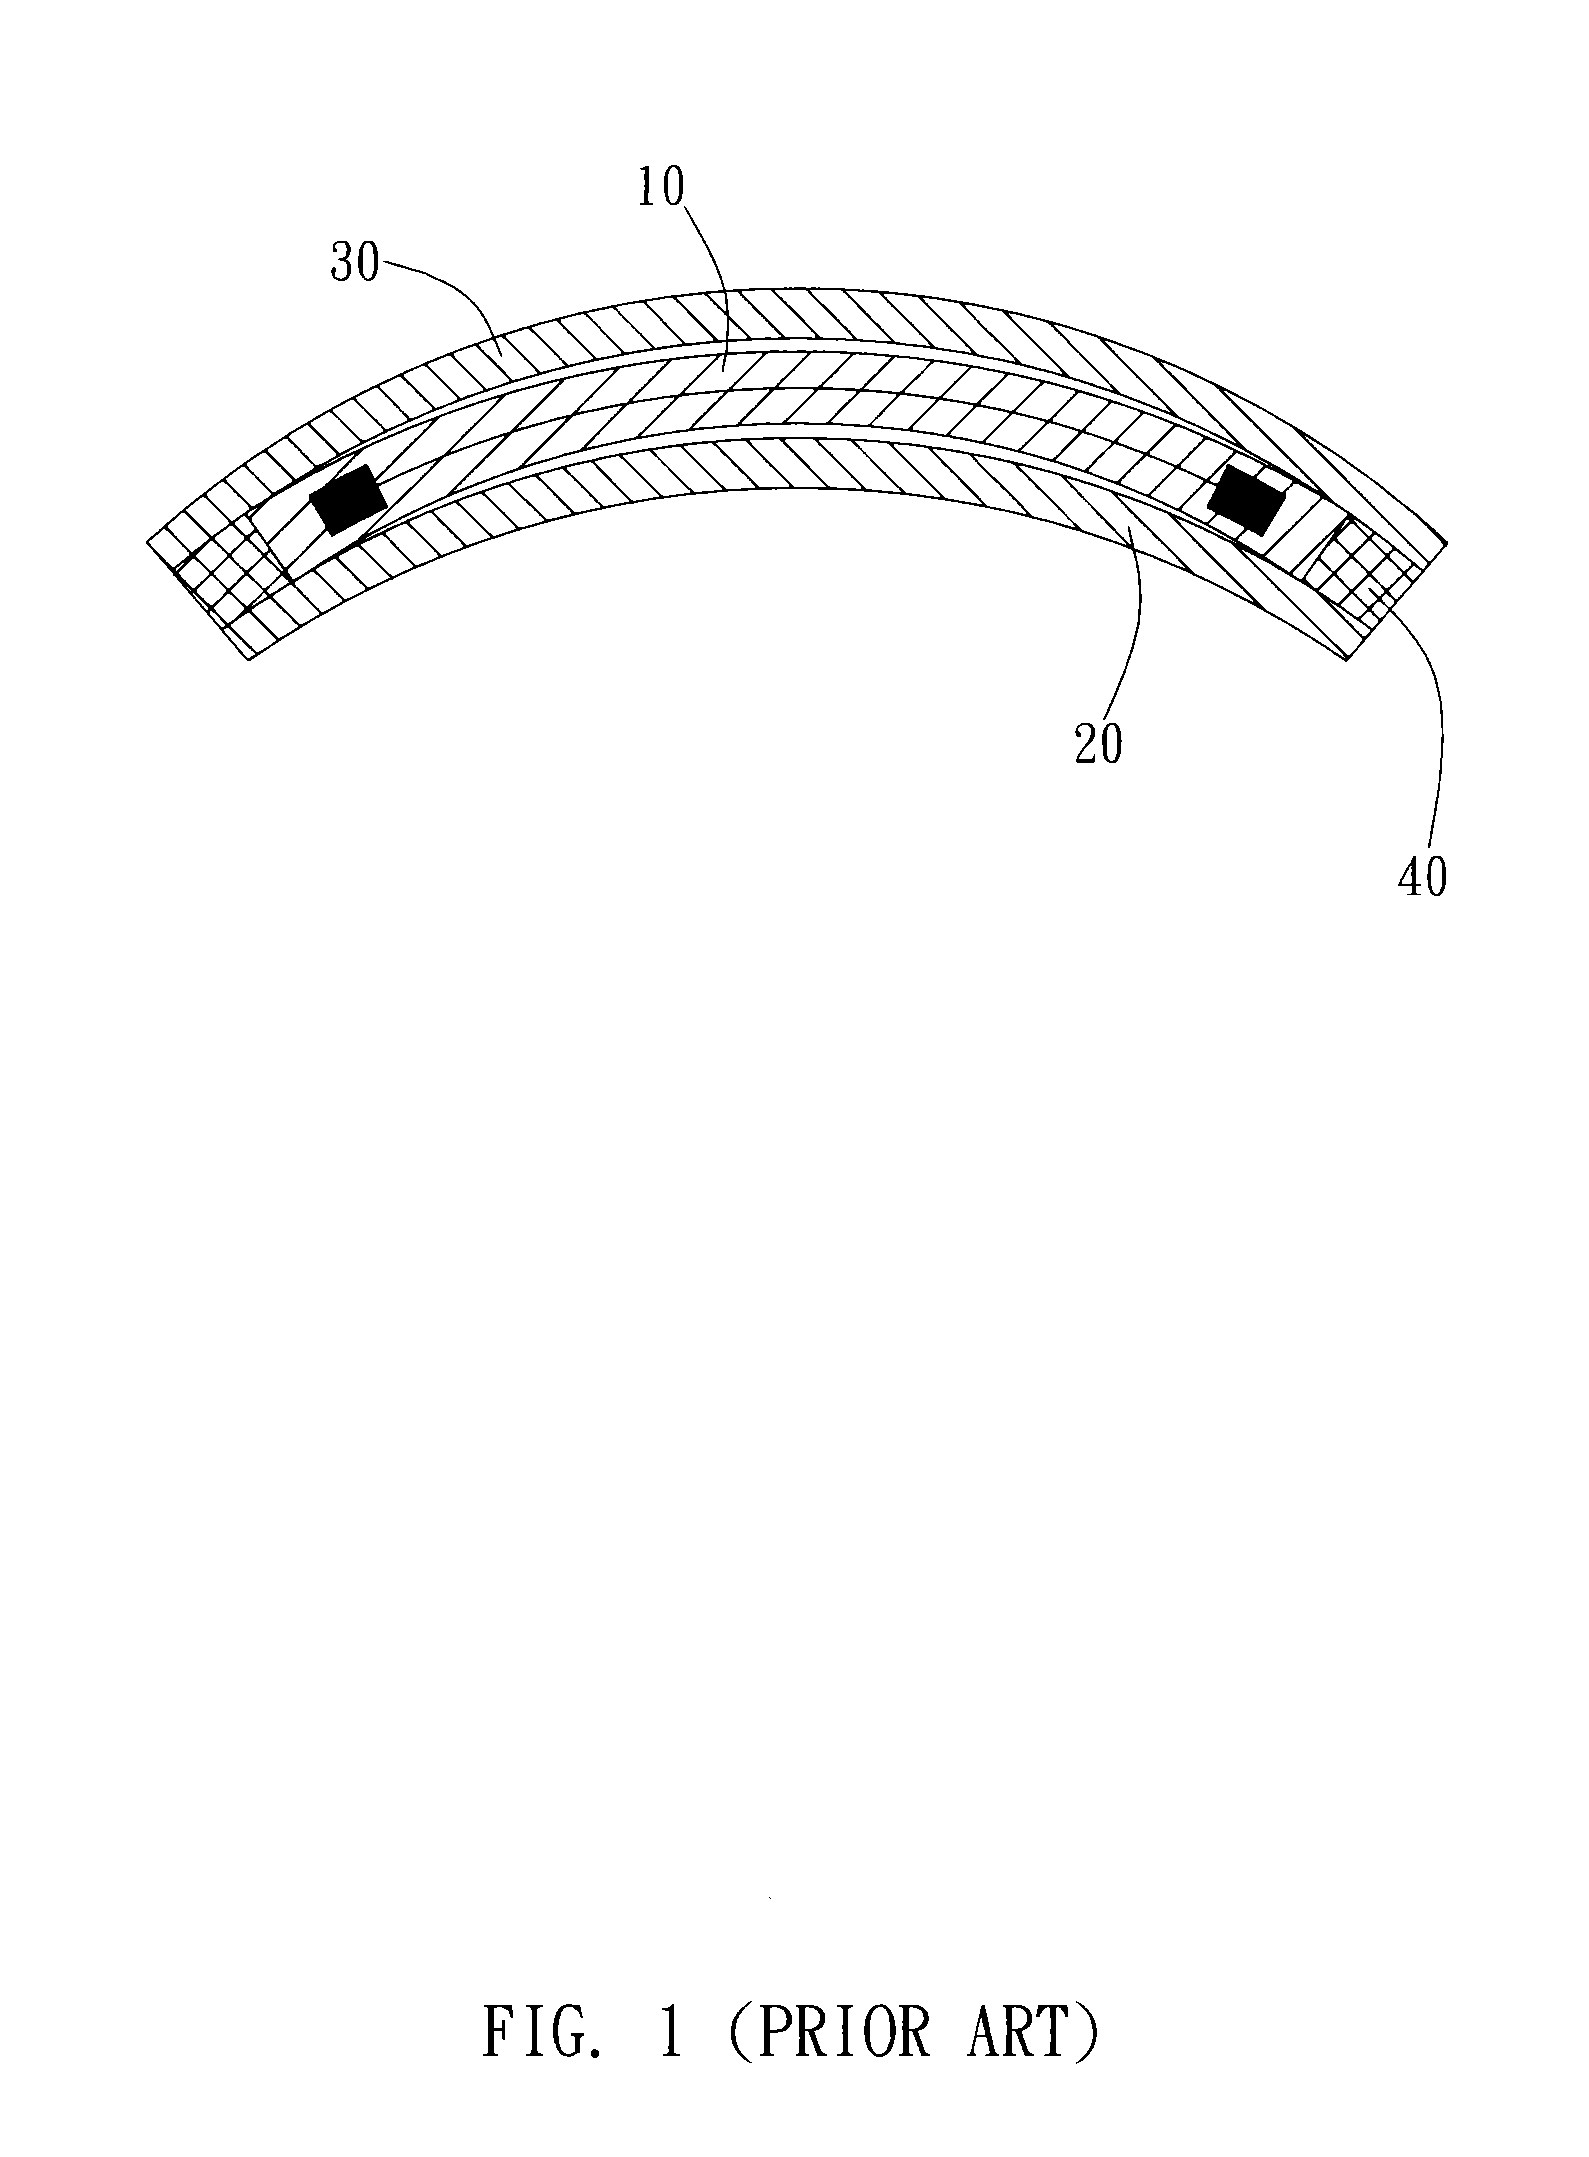 Curve-Shaped Display Module, Manufacture Method Thereof, and Manufacture Apparatus for Manufacturing the Same